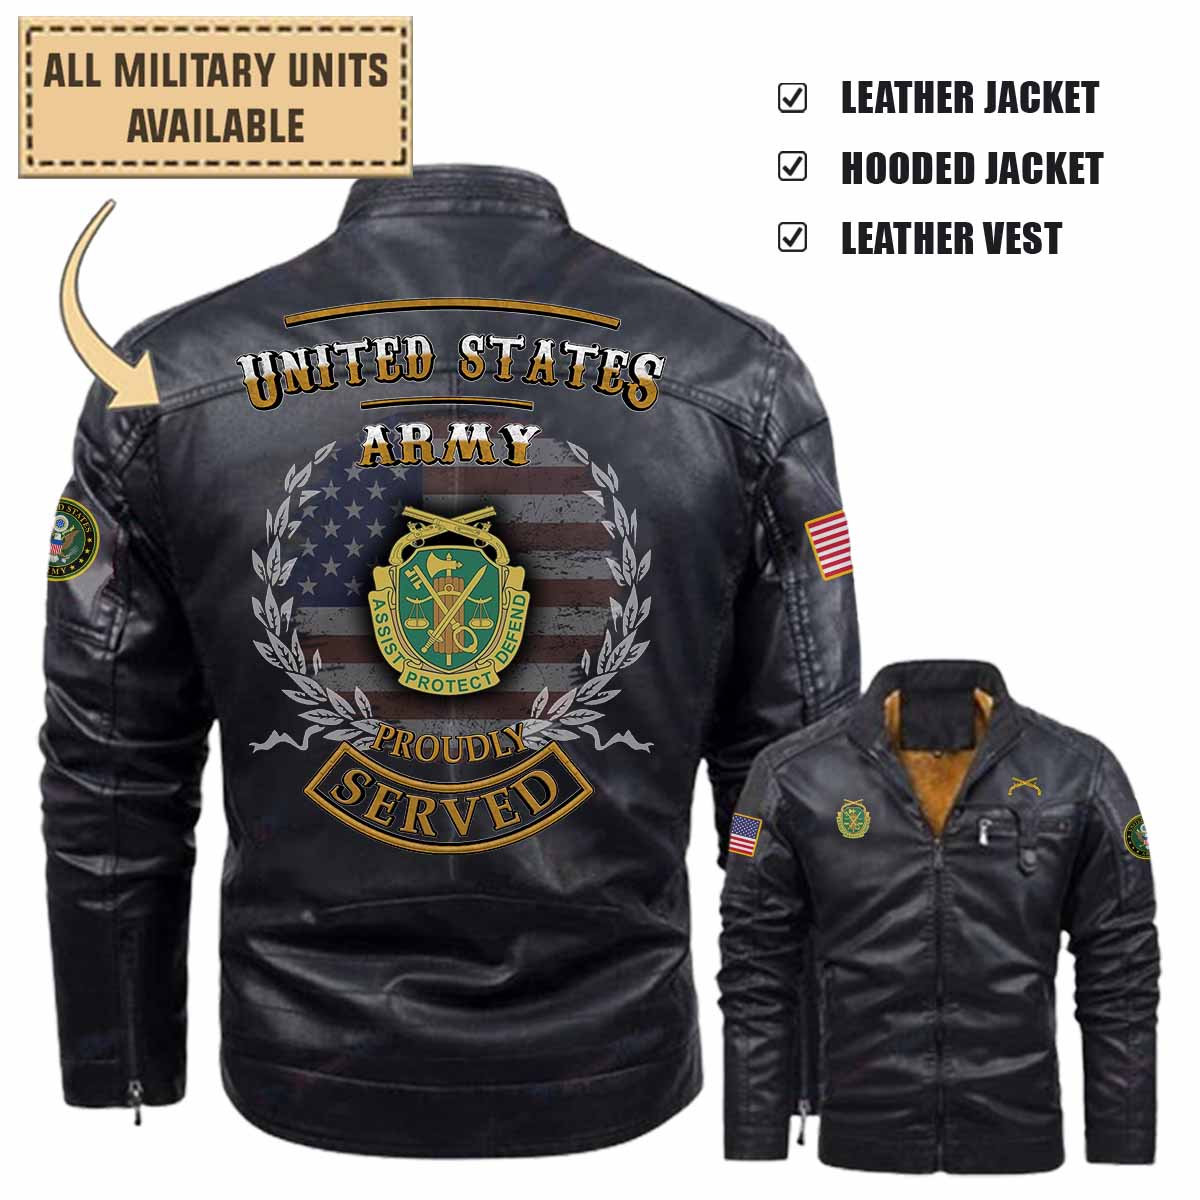 3rd MP DET 3rd Military Police Detachment_Leather Jacket and Vest